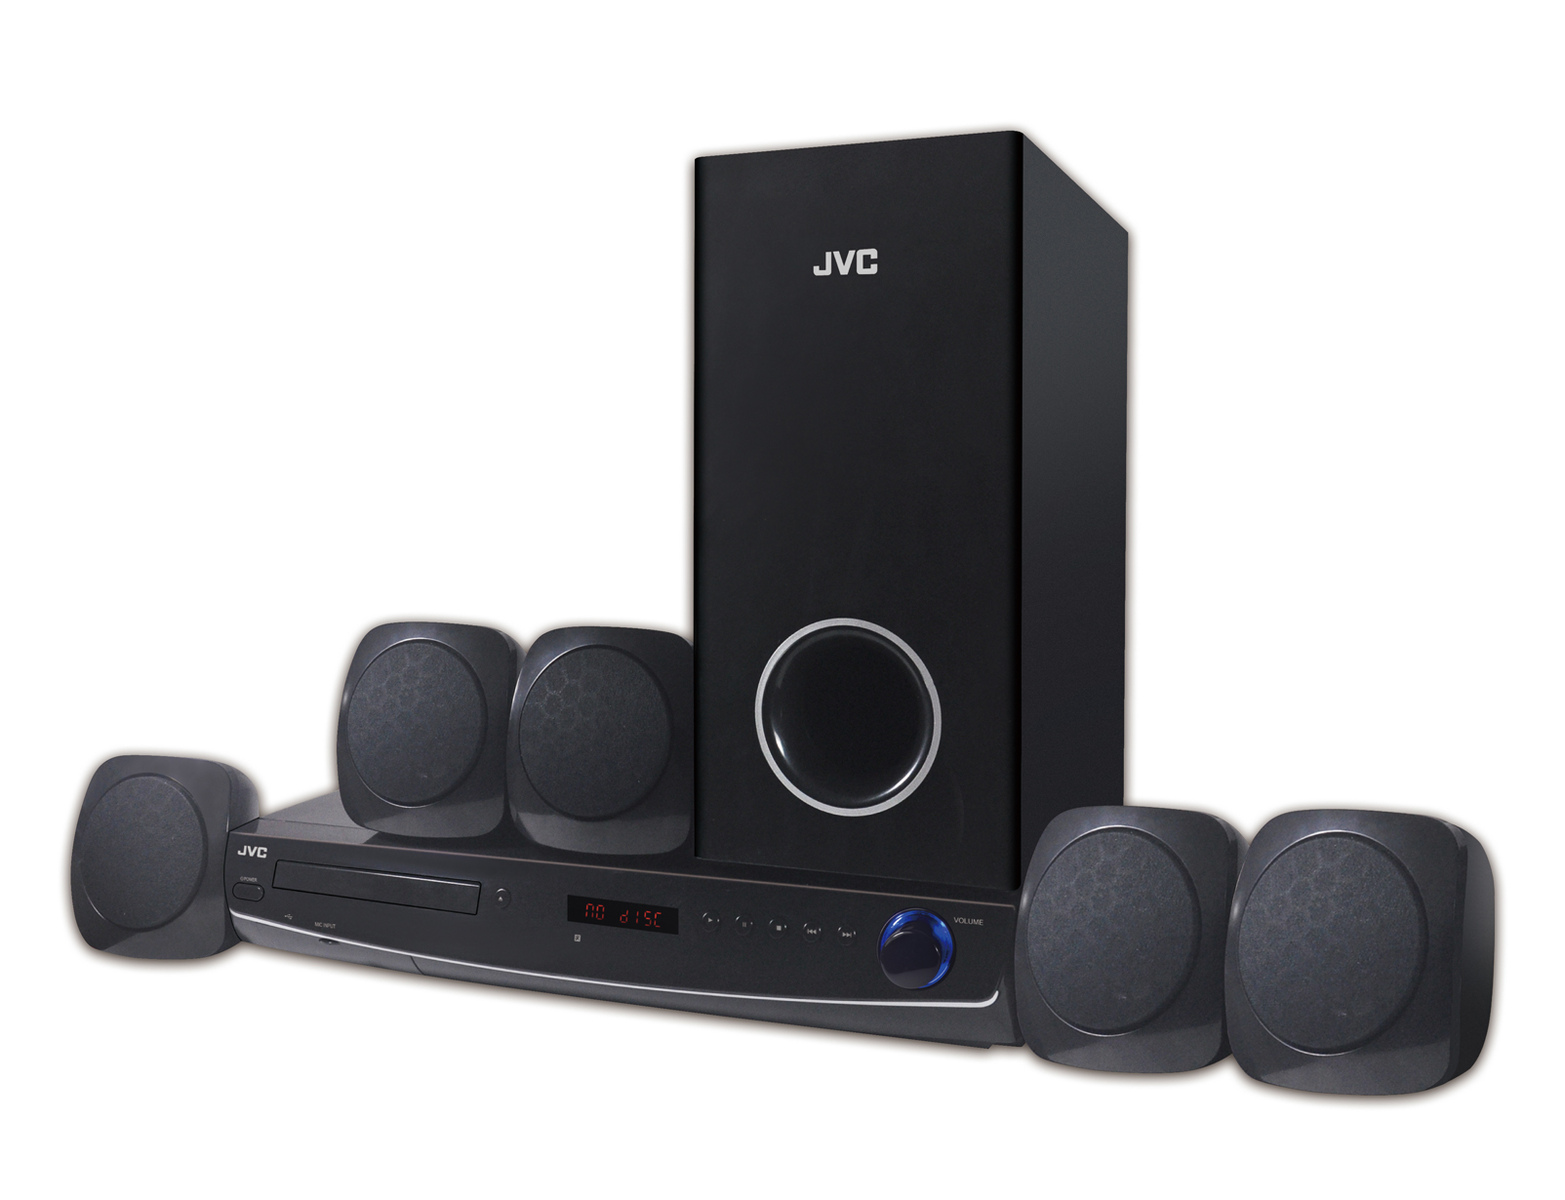 What Surround Sound System Is Compatible With JVC TV